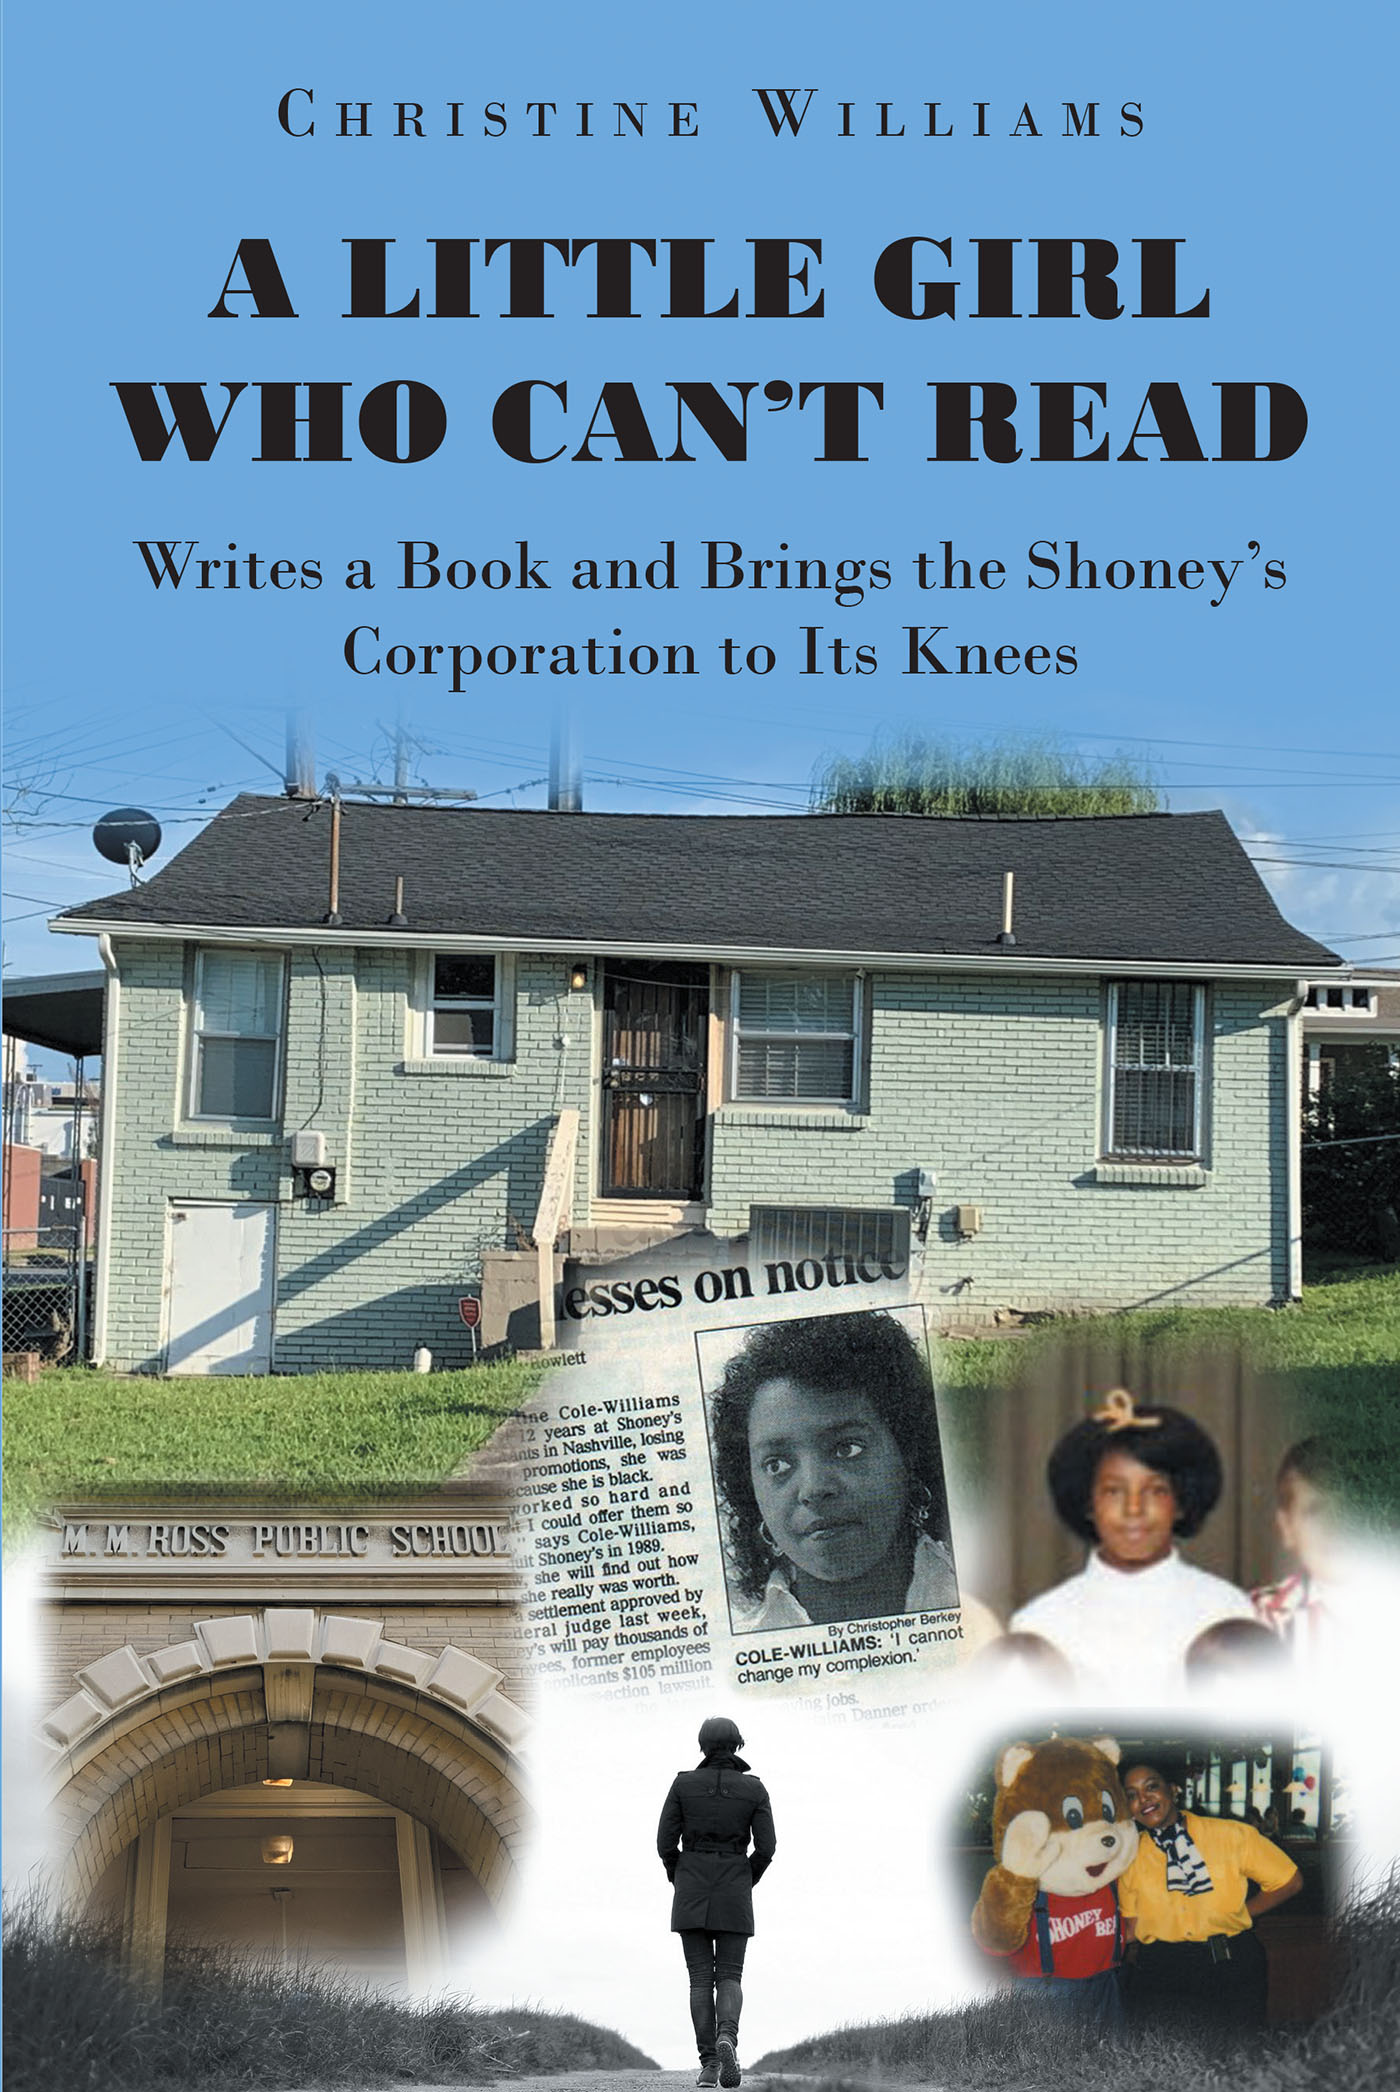 Author Christine Williams’s New Book, "A Little Girl Who Can’t Read Writes a Book and Brings the Shoney’s Corporation to Its Knees," is the Author’s Amazing Life Story